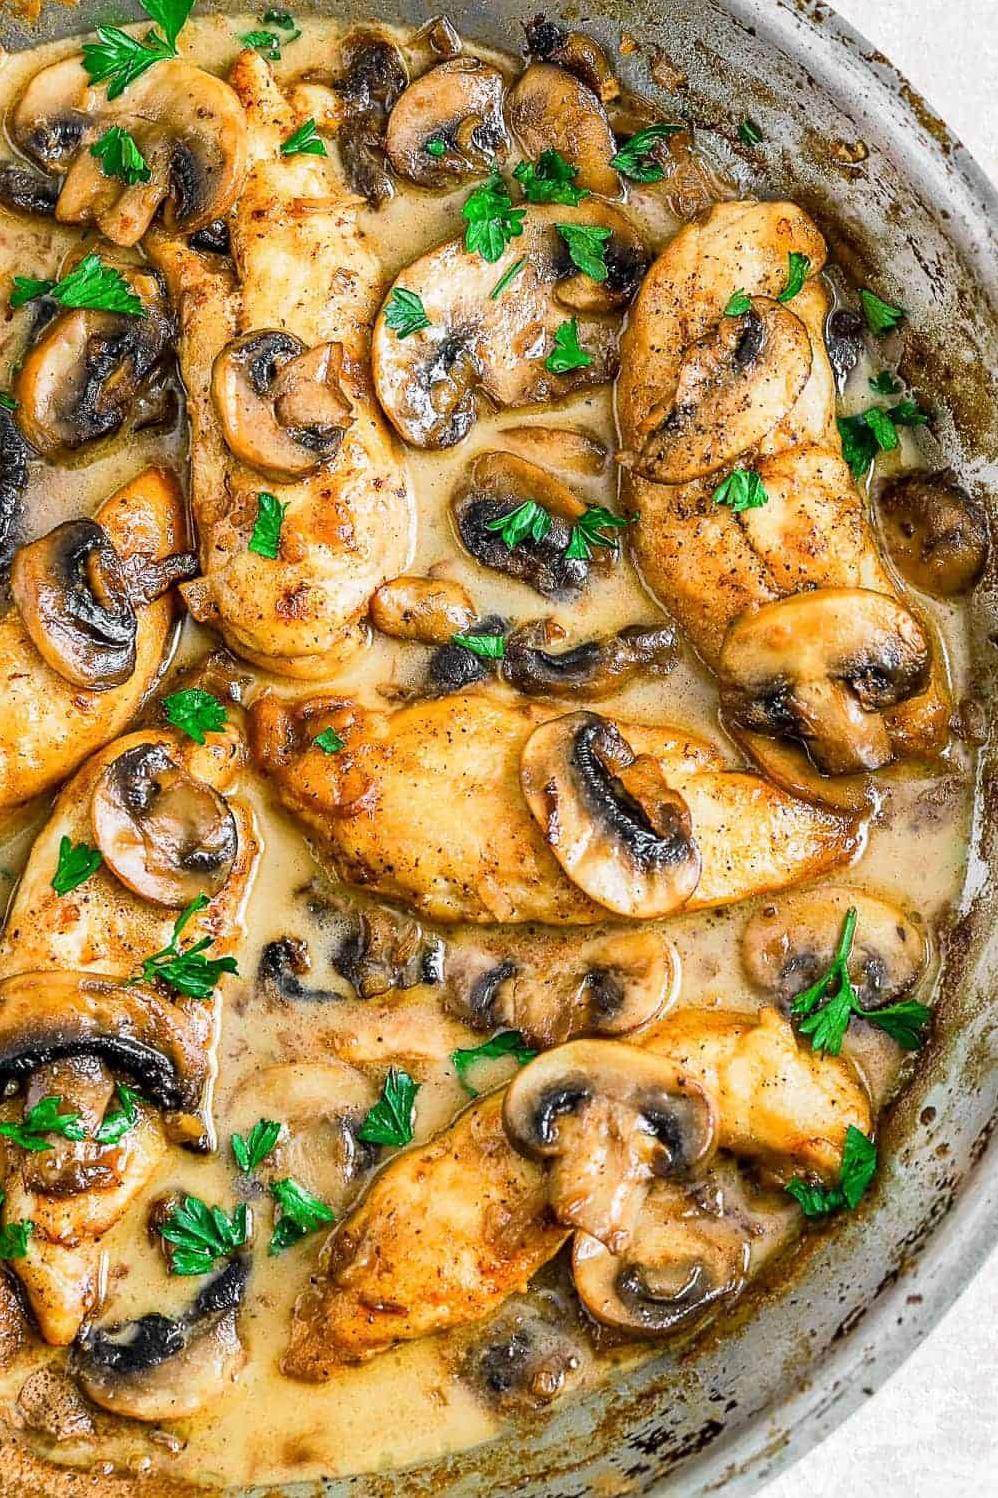  Bring the ultimate autumn flavors to your table with this flavorful and tender chicken, combined with earthy mushrooms and Marsala wine!